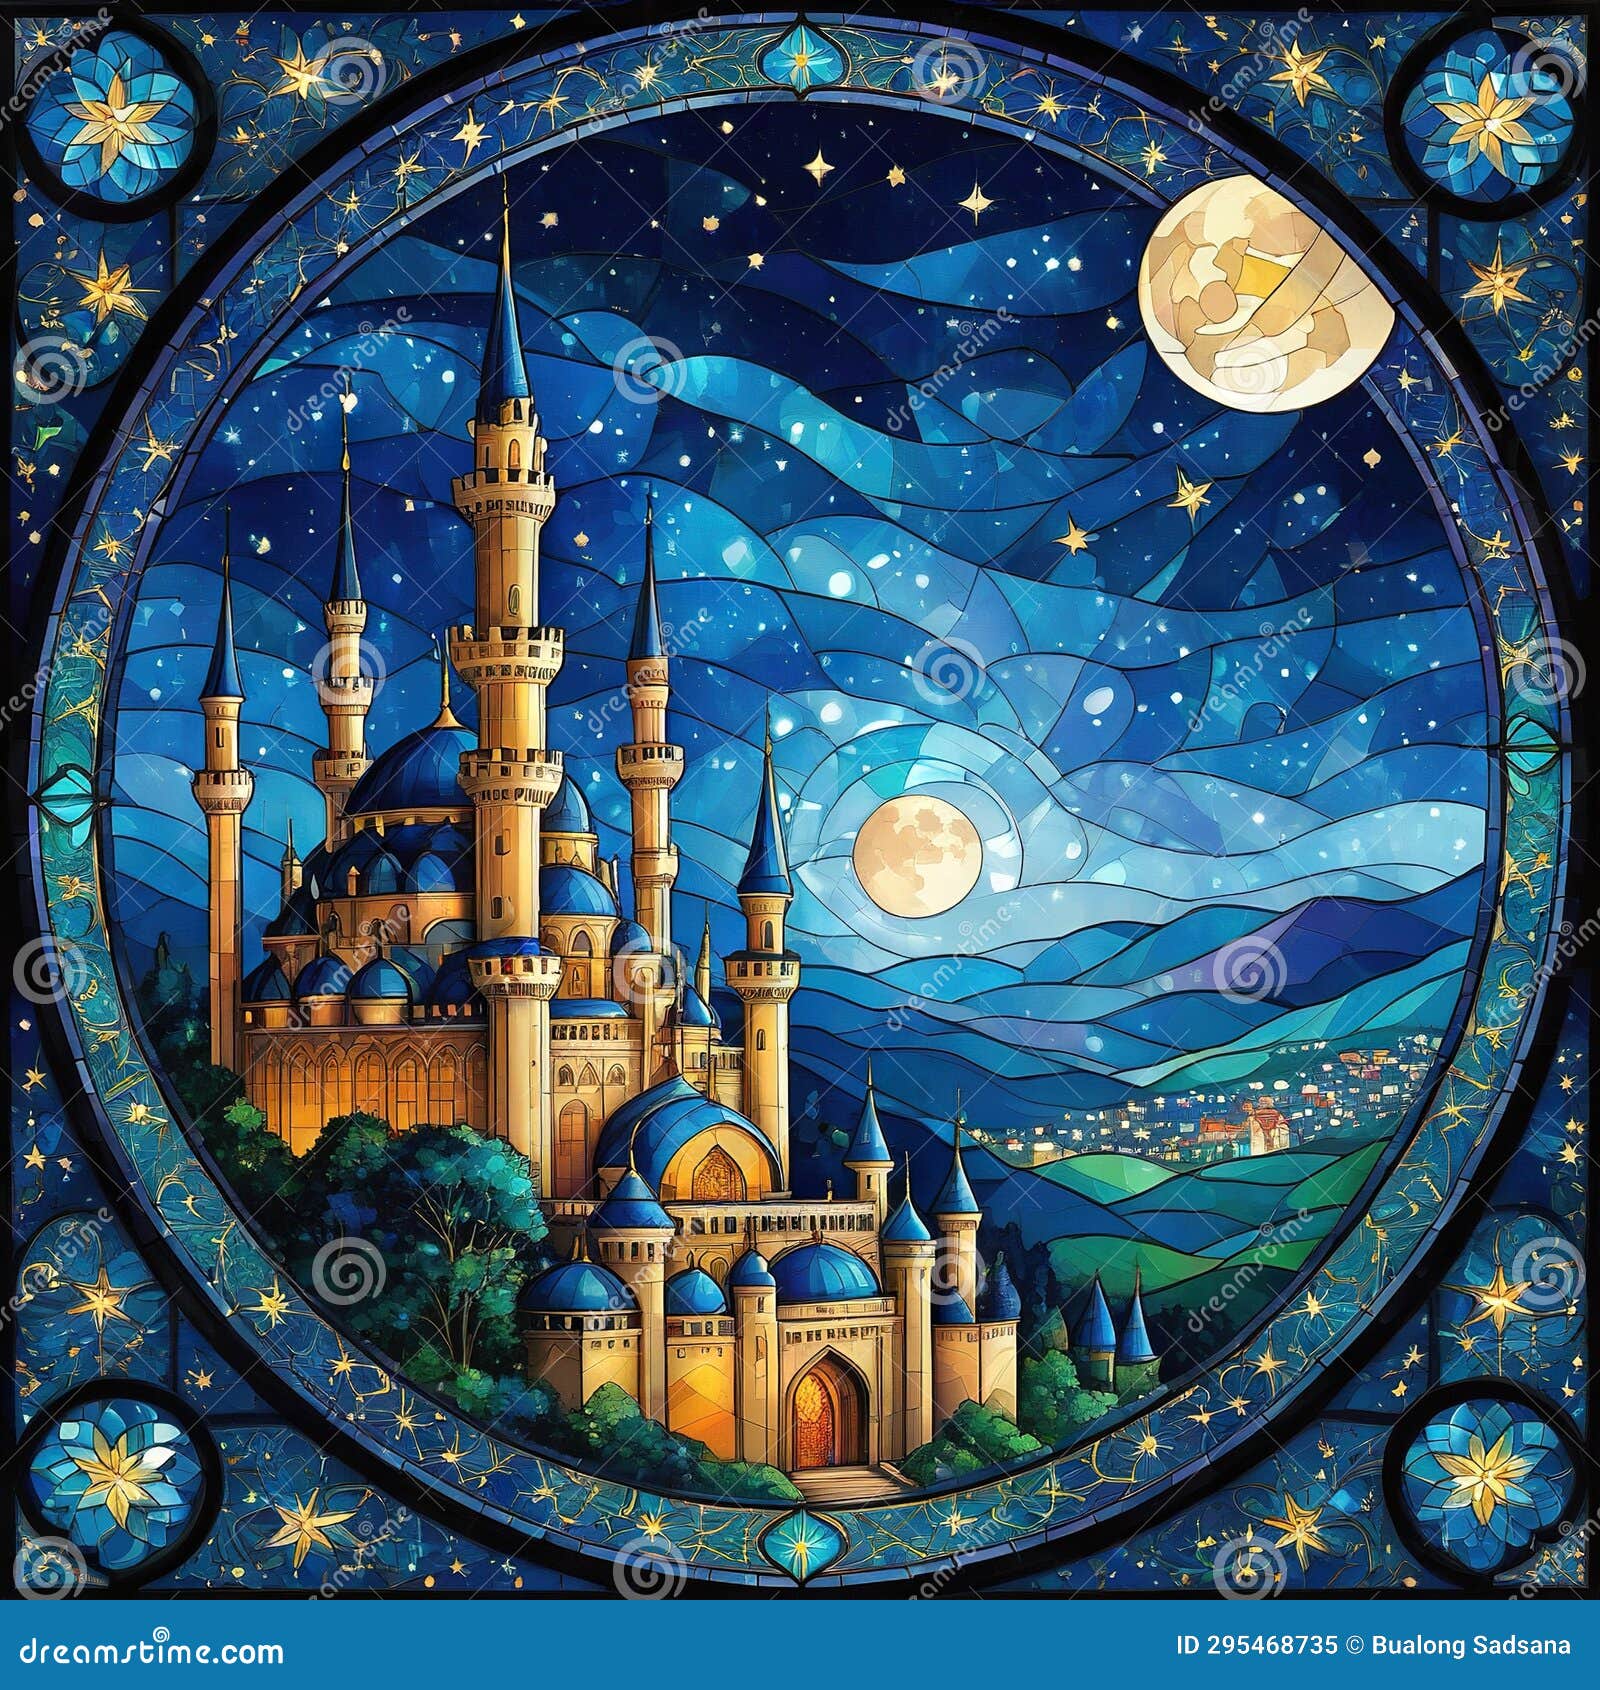 aof ornate s in the style of stained glass with night landscape with stars and